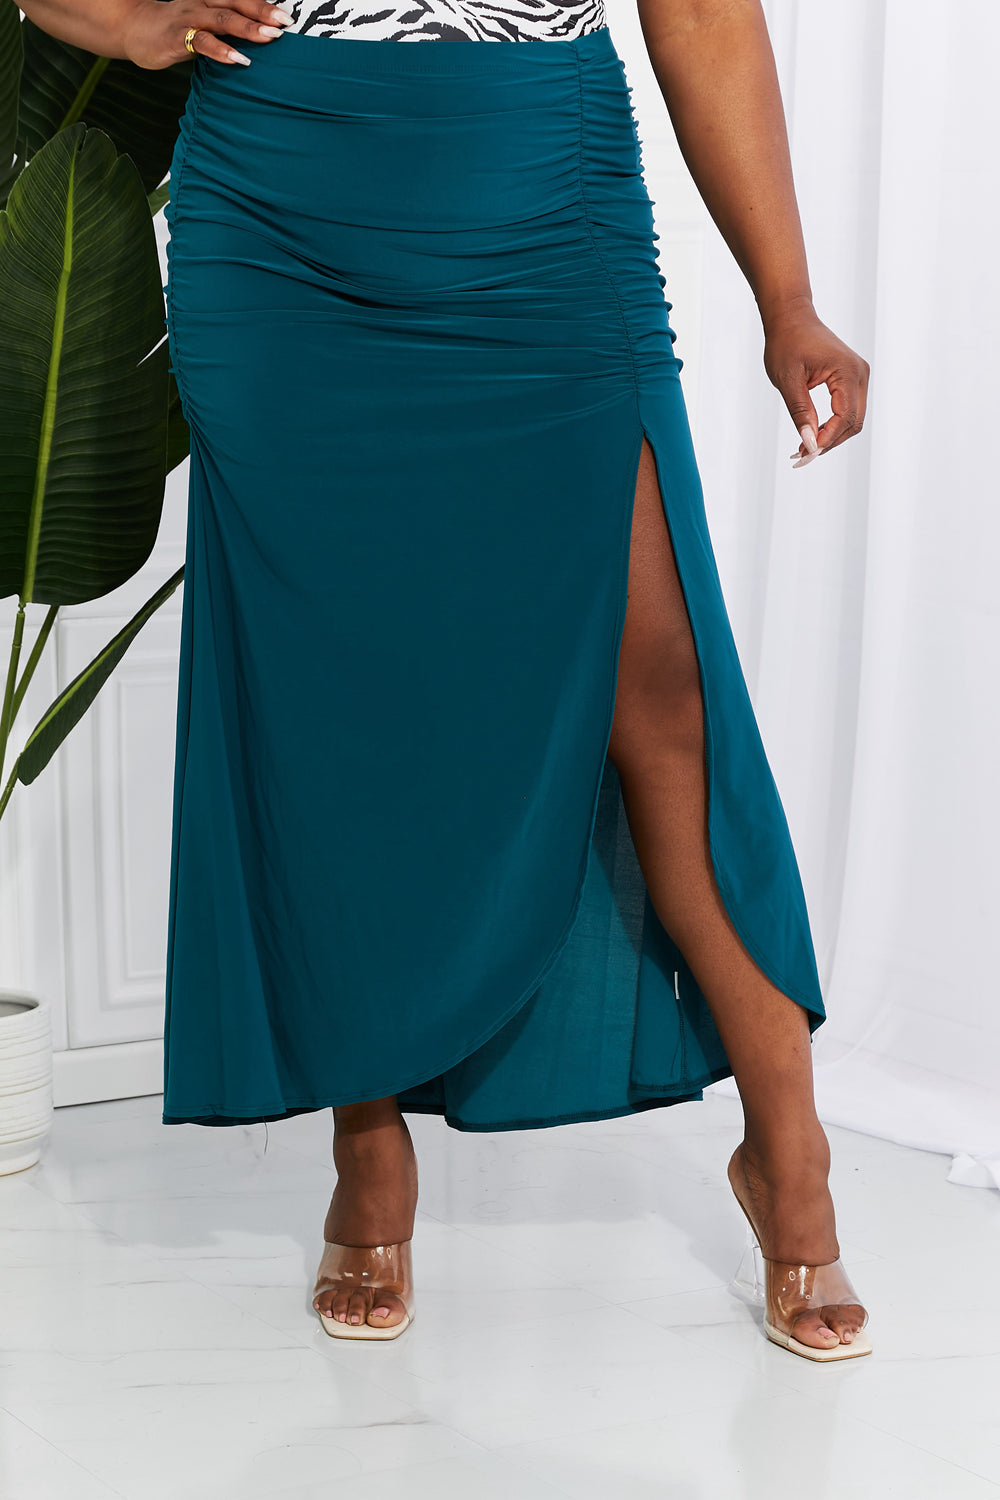 Up and Up: Ruched Slit Maxi Skirt in Teal | Skirt - CHANELIA